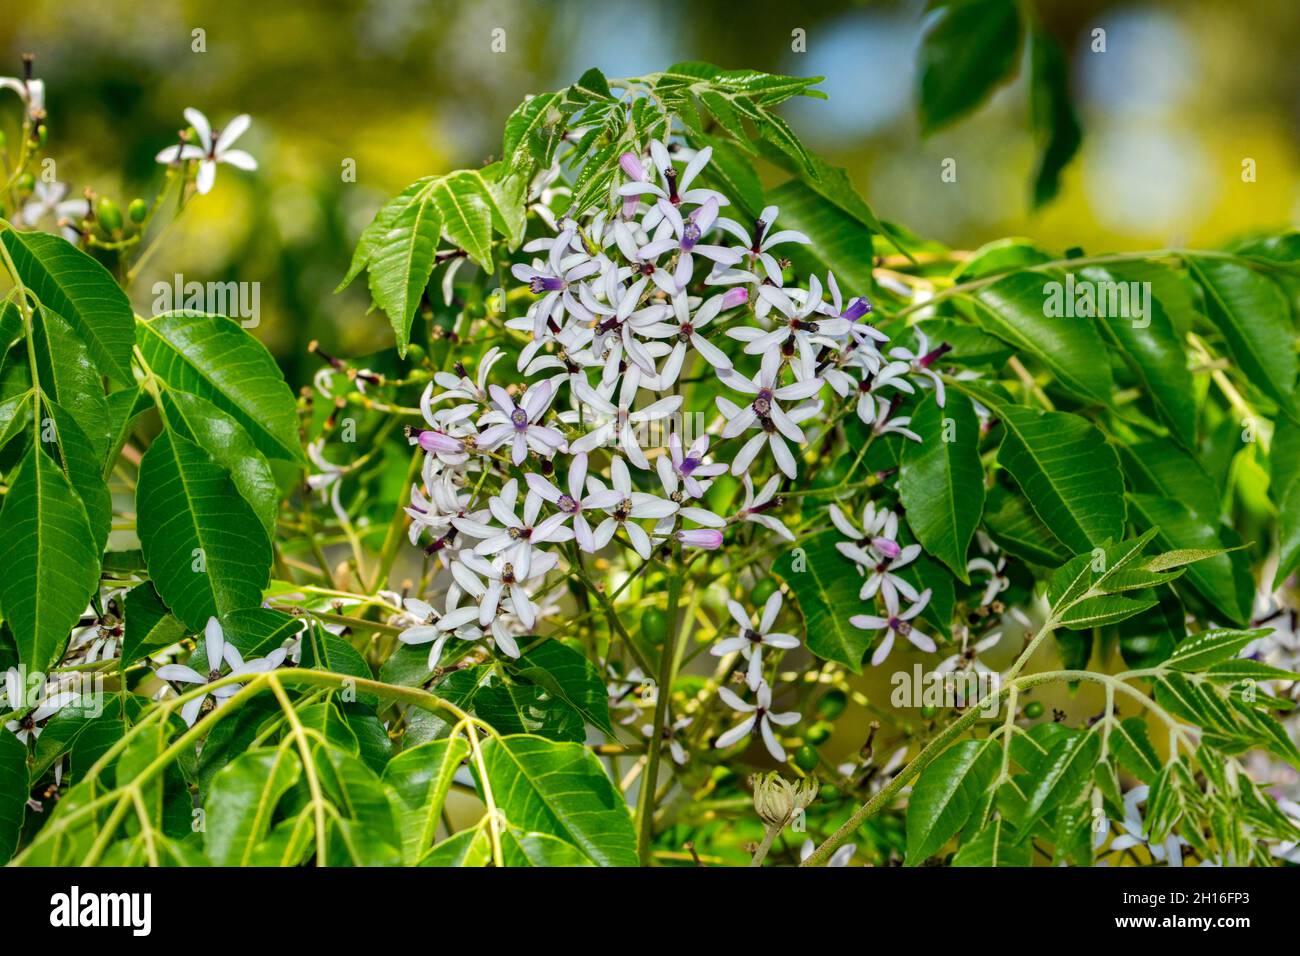 Cluster of tiny mauve flowers and vivid green leaves of Melia azedarach, Chinaberry / White Cedar Tree, a deciduous Australian native tree species Stock Photo